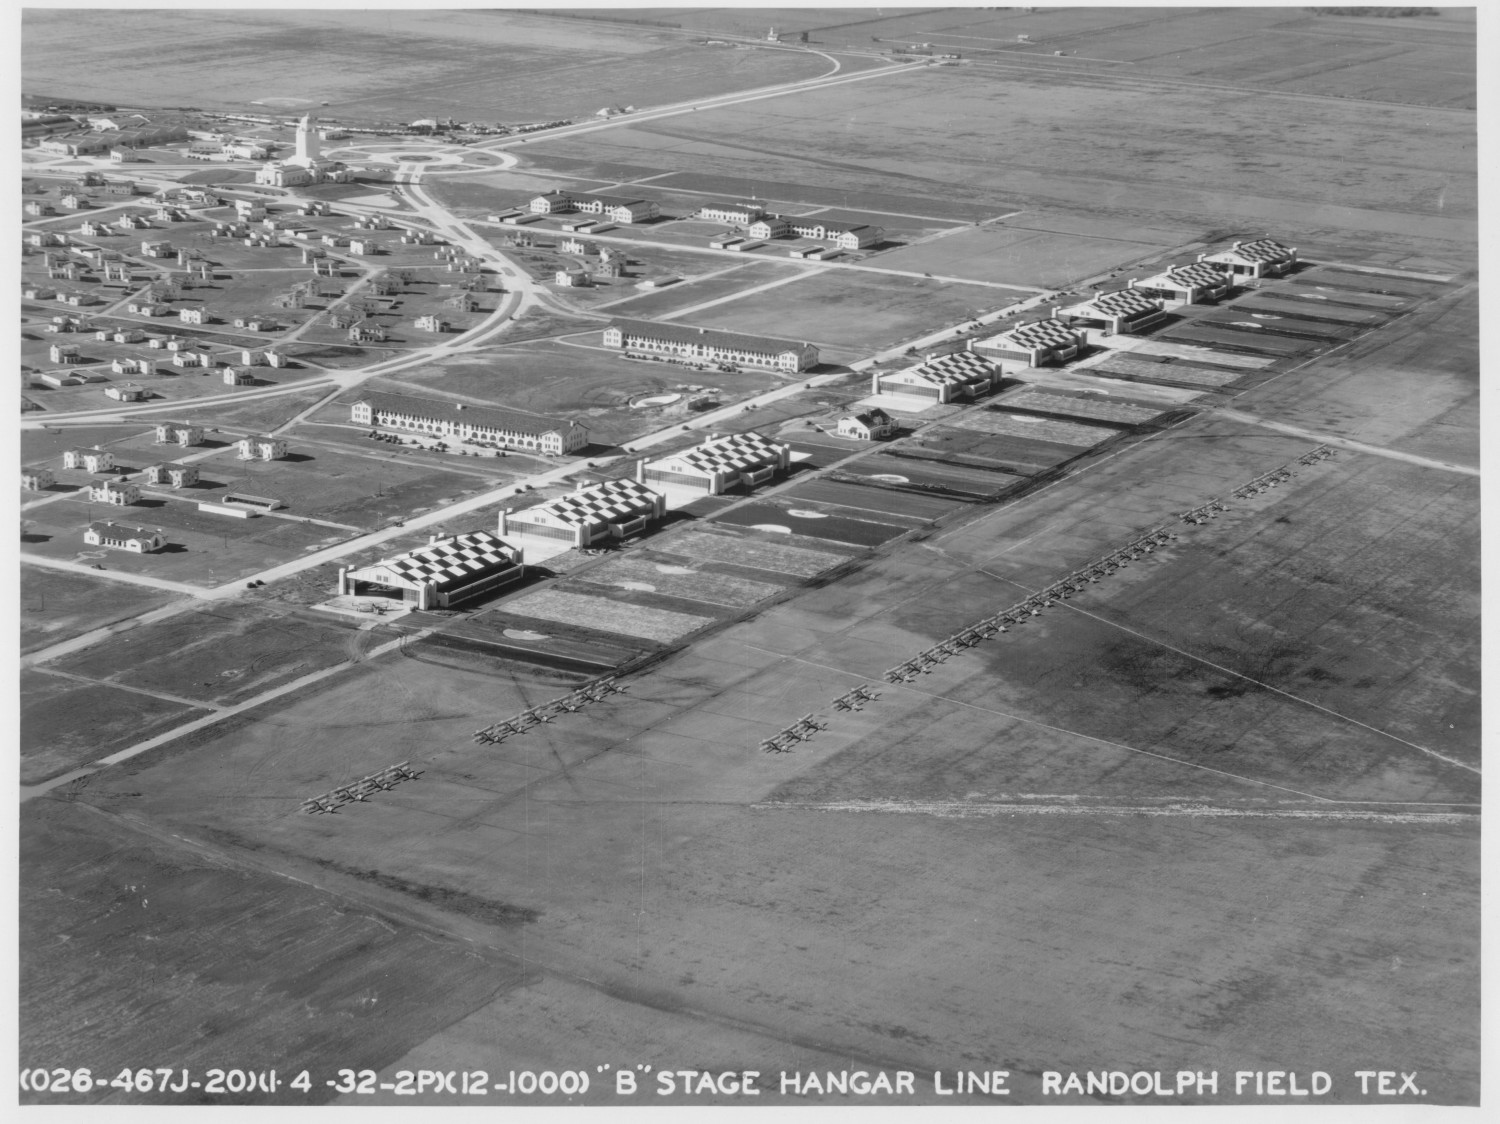 "B" Stage Hangar Line at Randolph Field
                                                
                                                    [Sequence #]: 1 of 1
                                                